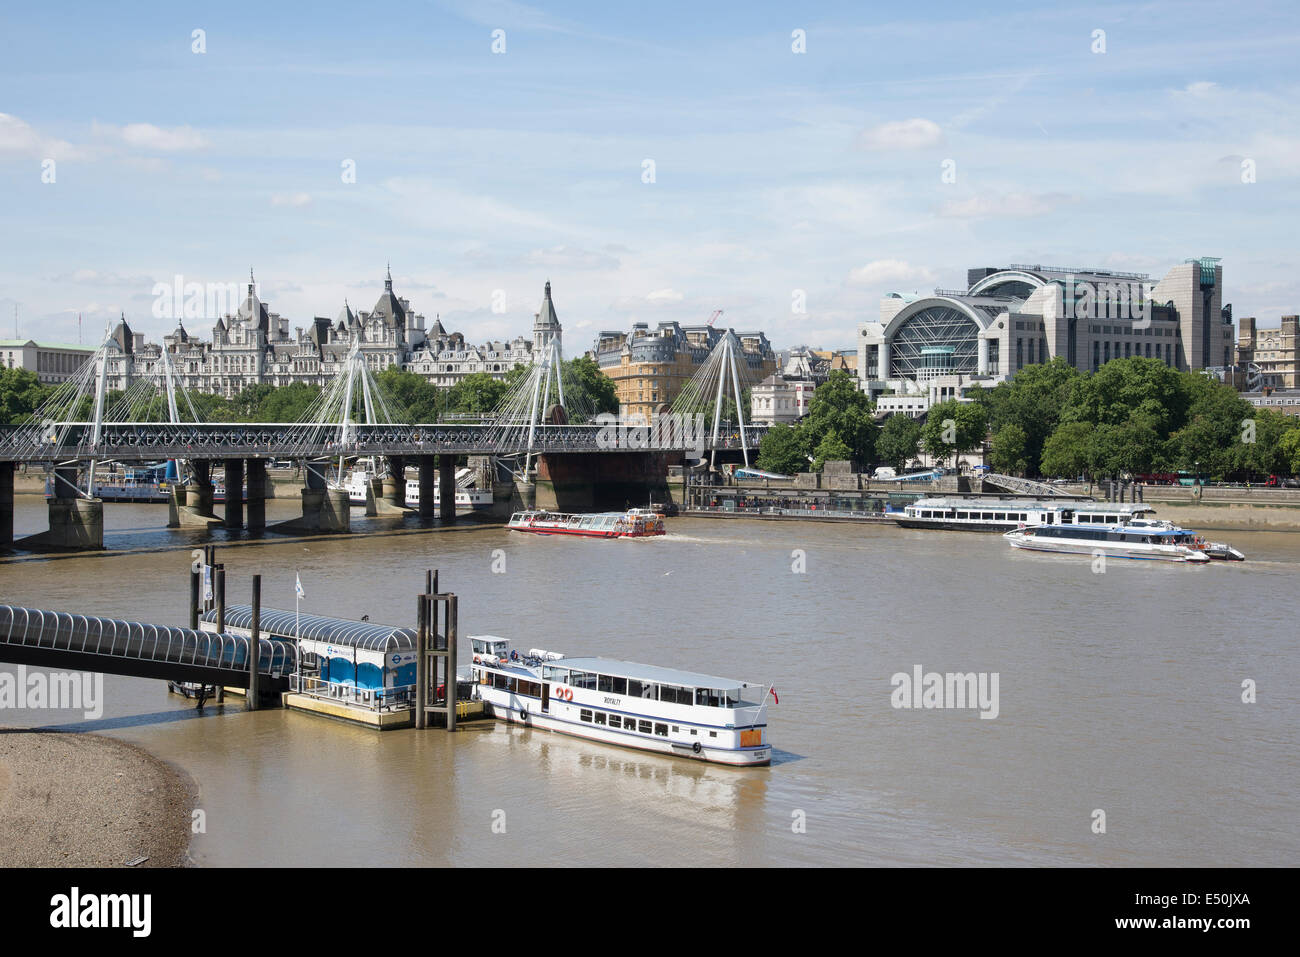 River Thames looking towards Festival Pier and Charing Cross station on the Embankment from Waterloo Bridge London UK Stock Photo